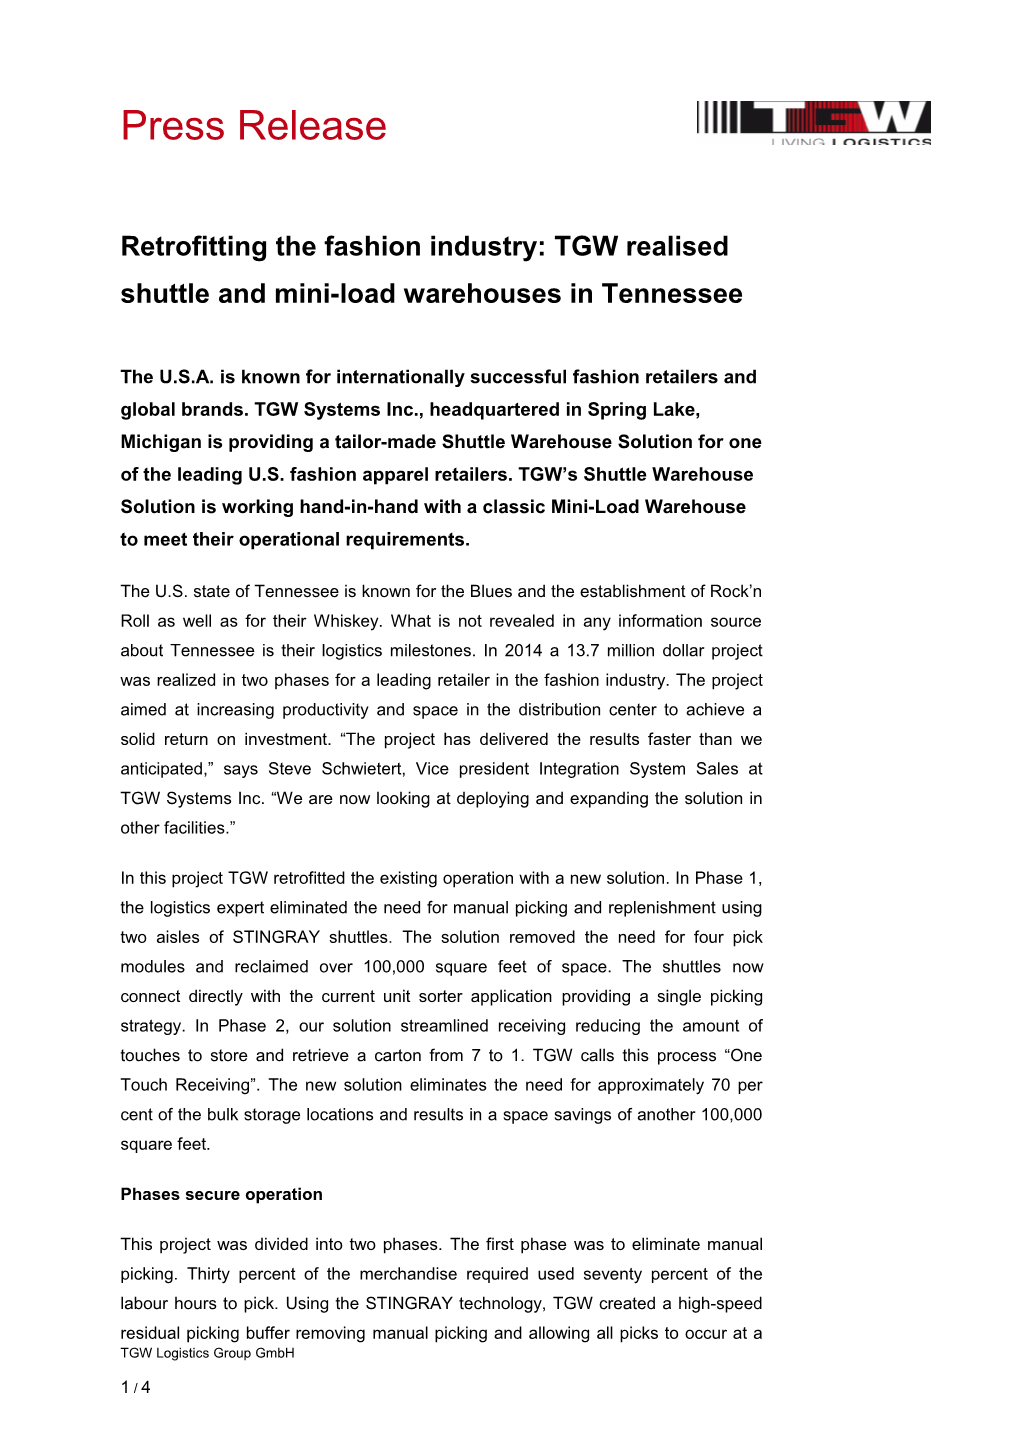 Retrofitting the Fashion Industry: TGW Realised Shuttle and Mini-Load Warehouses in Tennessee